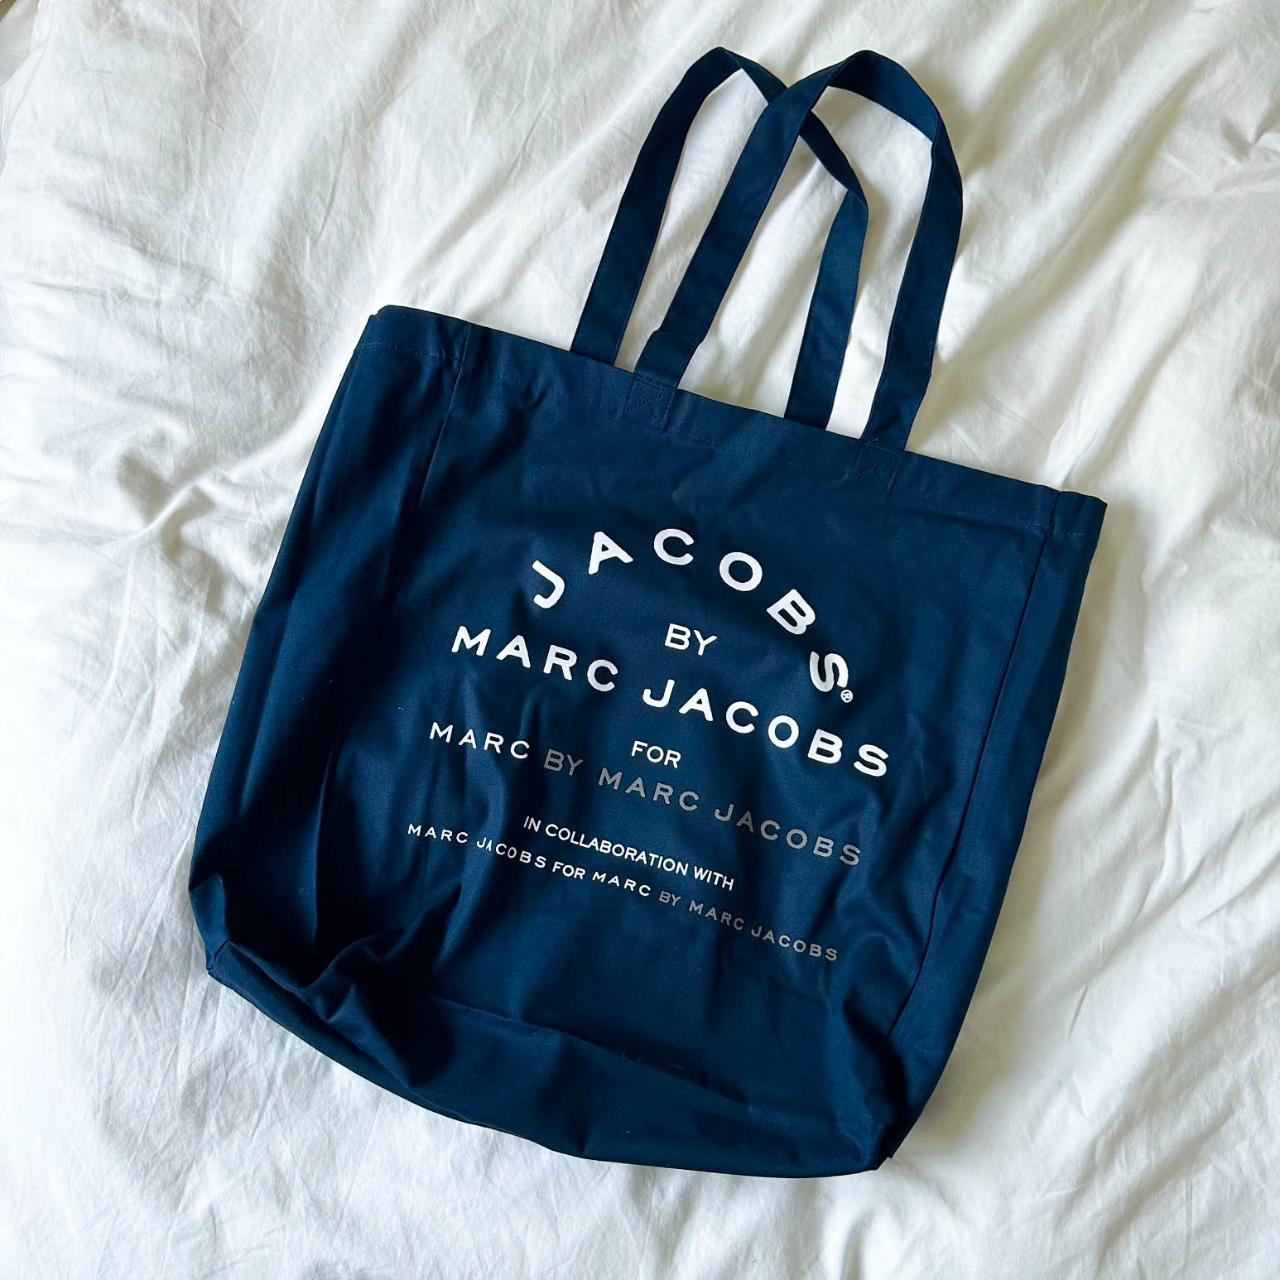 Jacobs by Marc Jacobs Canvas Tote Bag Shopper From... - Depop